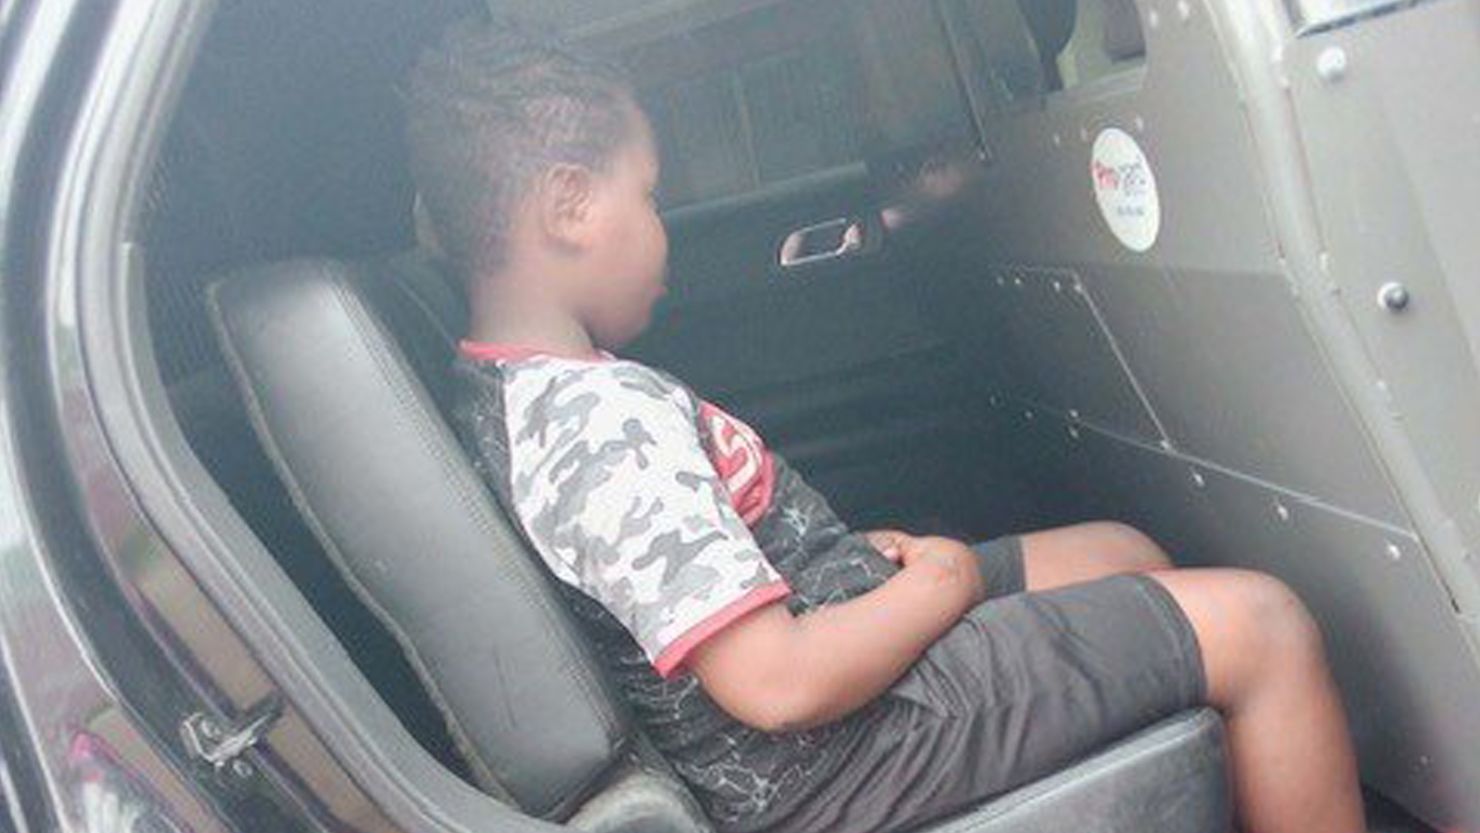 A Mississippi woman, LaTonya Eason, the mother of 10-year-old Quantavious Eason, is asking for an apology and the firing of several police officers from the Senatobia Police Department after her 10-year-old son was arrested for urinating in a parking lot.